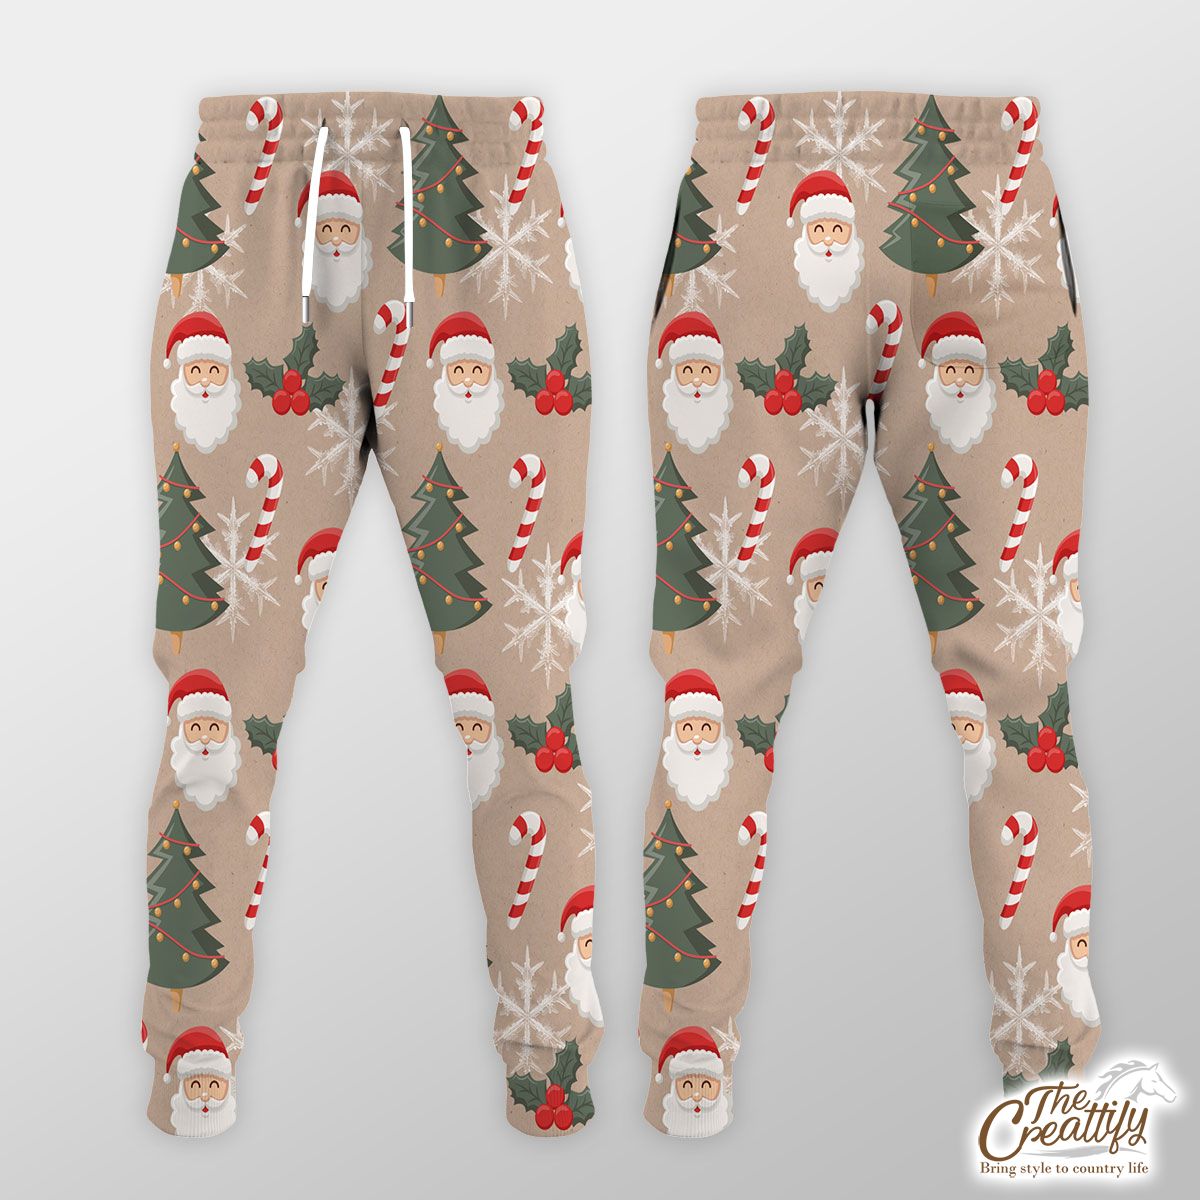 Santa Clause, Christmas Tree, Candy Cane, Holly Leaf On Snowflake Background Jogger Pant